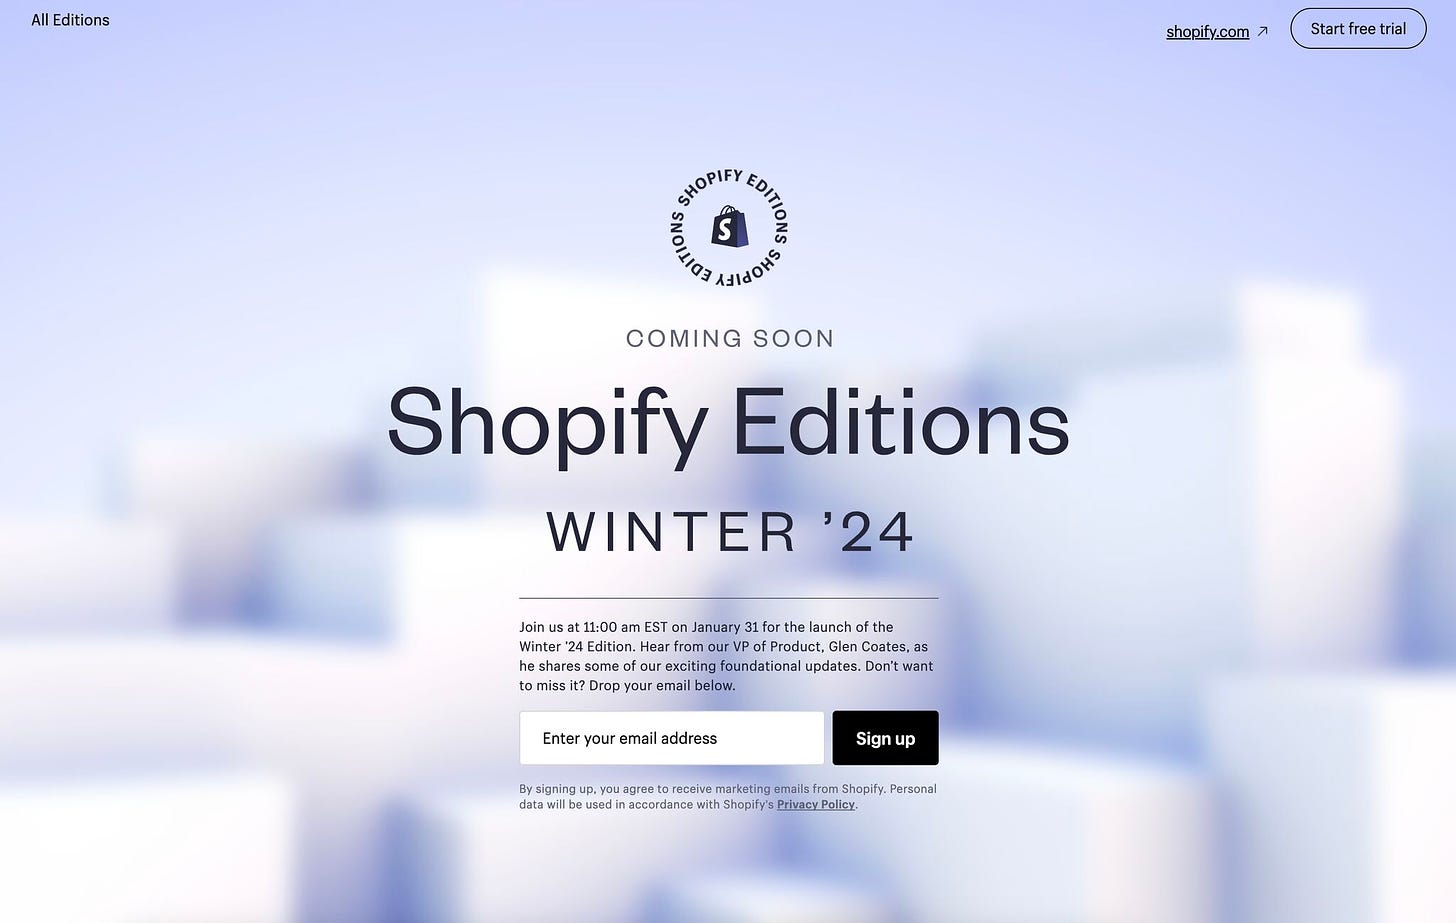 Shopify Editions